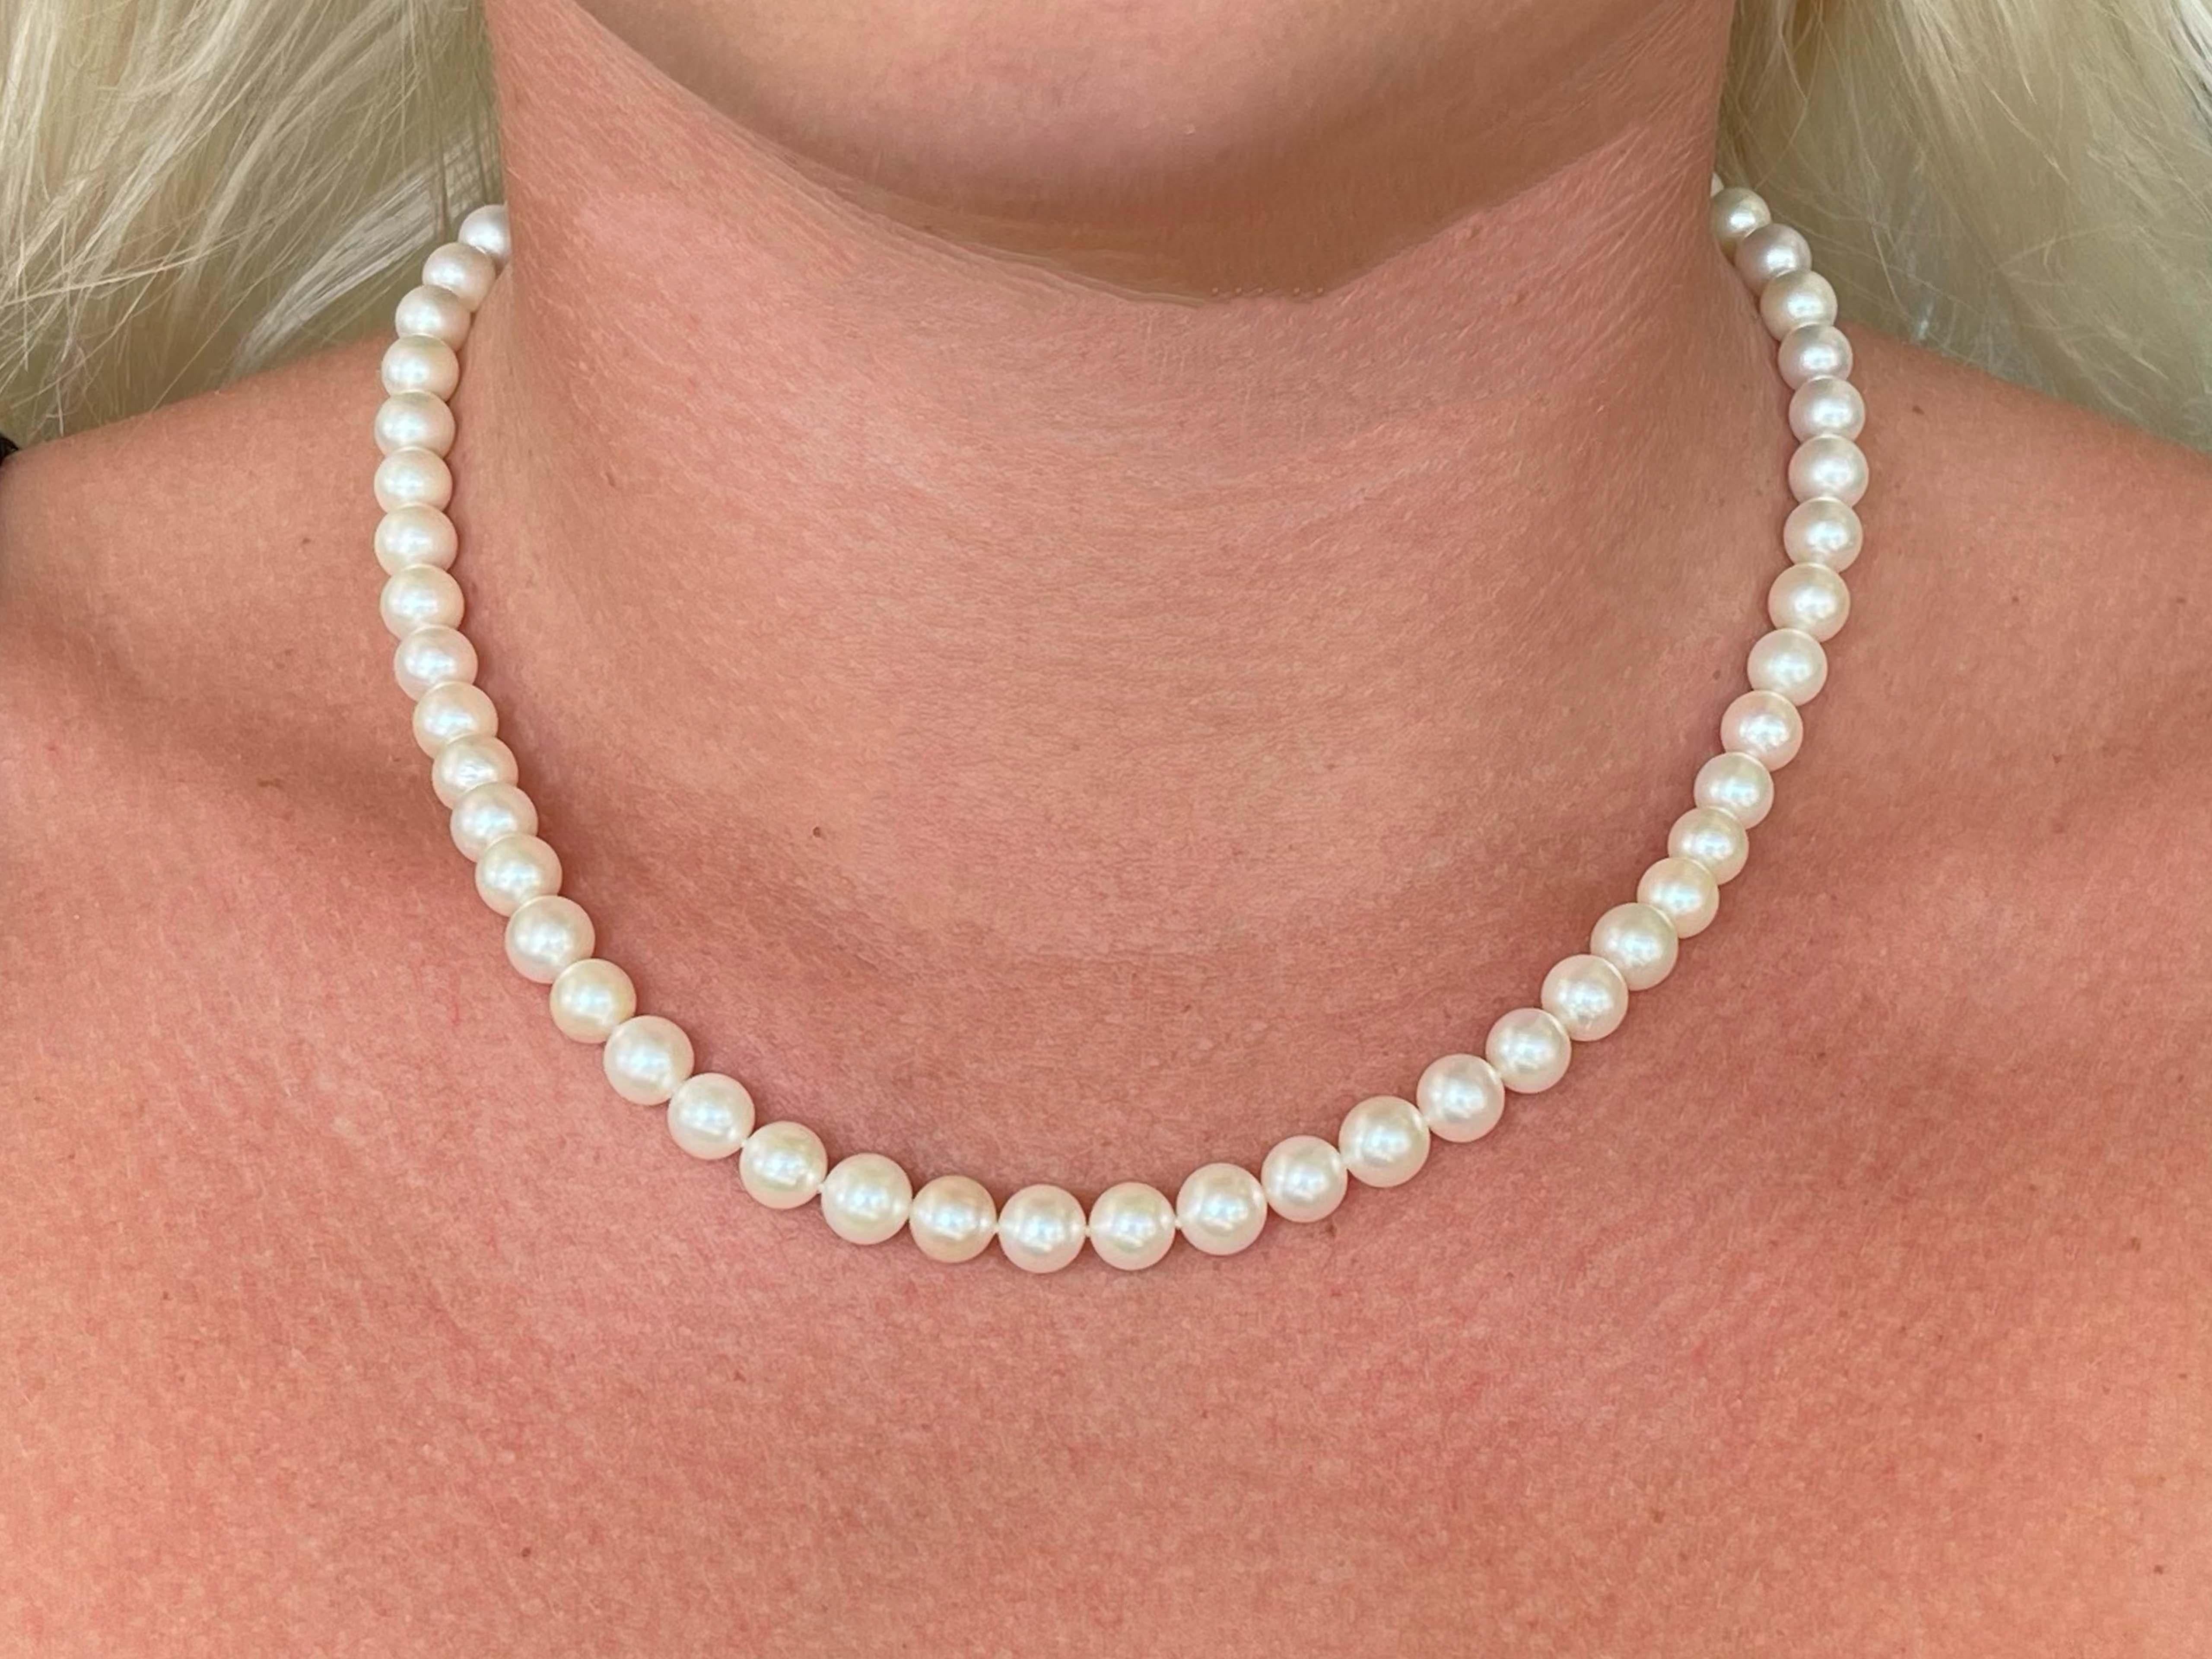 Each of Mikimoto's cultured pearl strands are a work of art born from the mystery of the sea. Creation of these strands requires incredible skill, judgment and craftsmanship. The journey begins with a rigorous selection process, culling the very